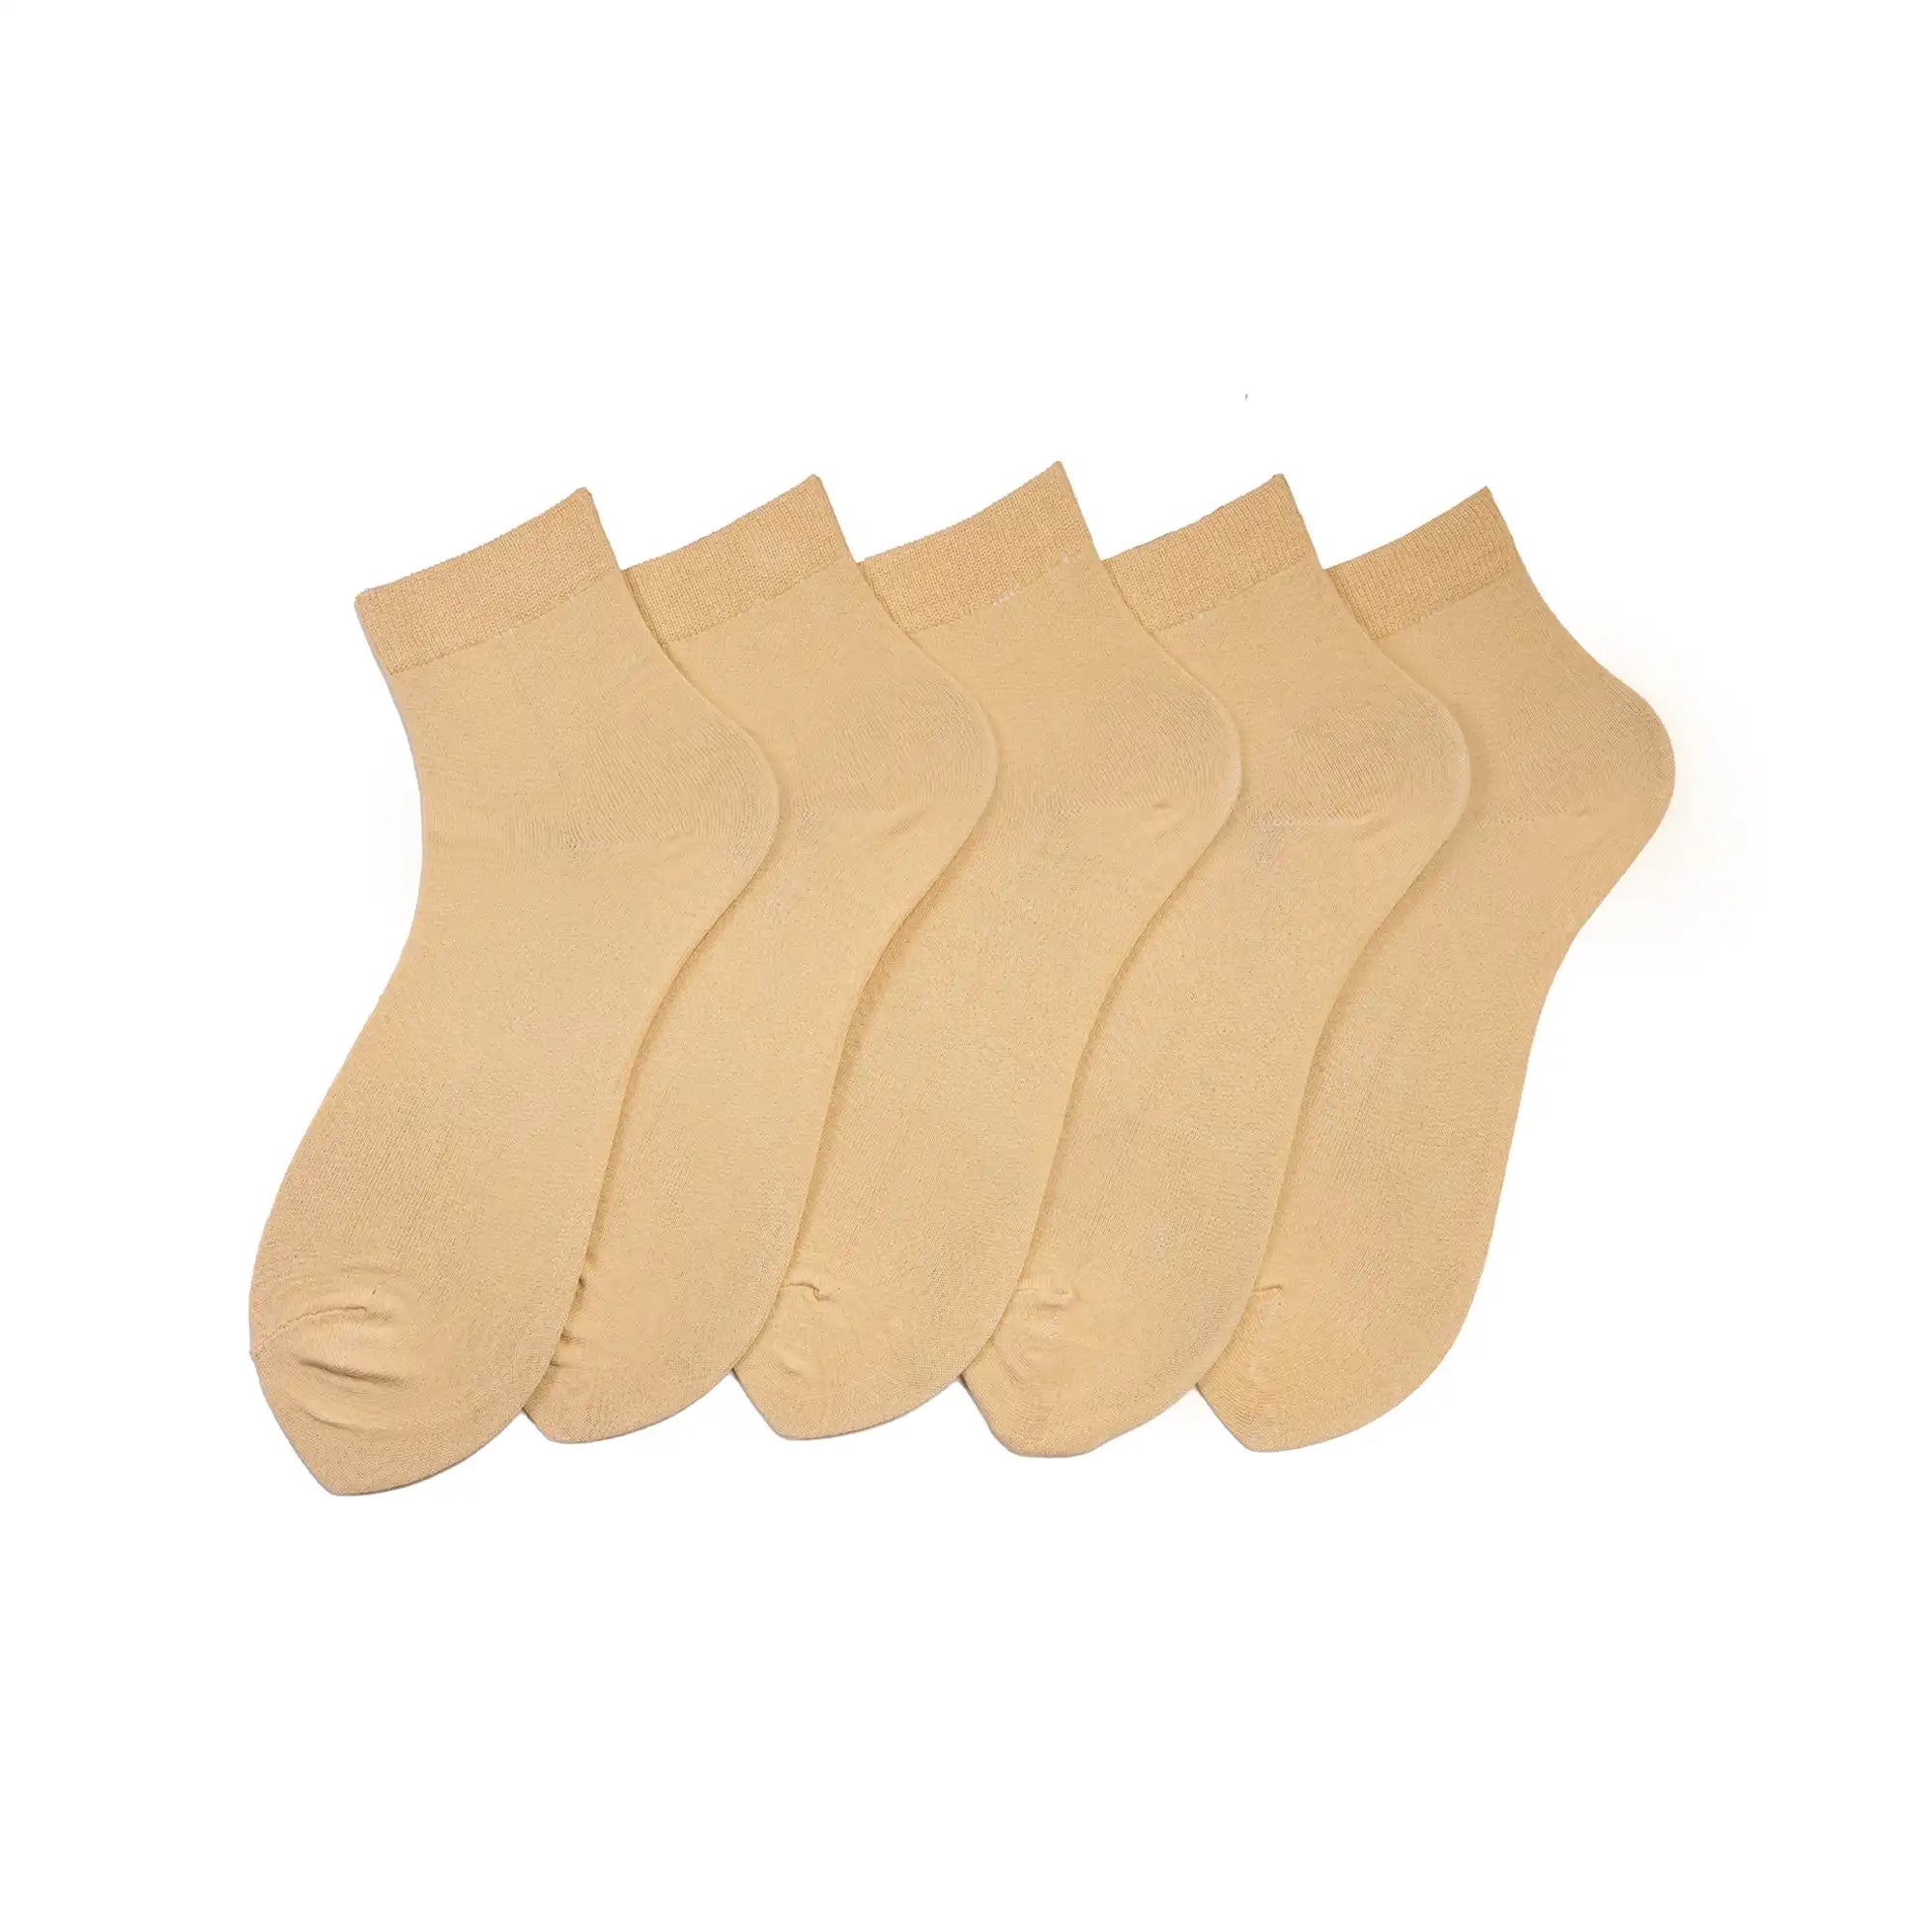 Young Wings Men's Beige Colour Cotton Fabric Solid Ankle Length Socks - Pack of 5, Style no. M1-224